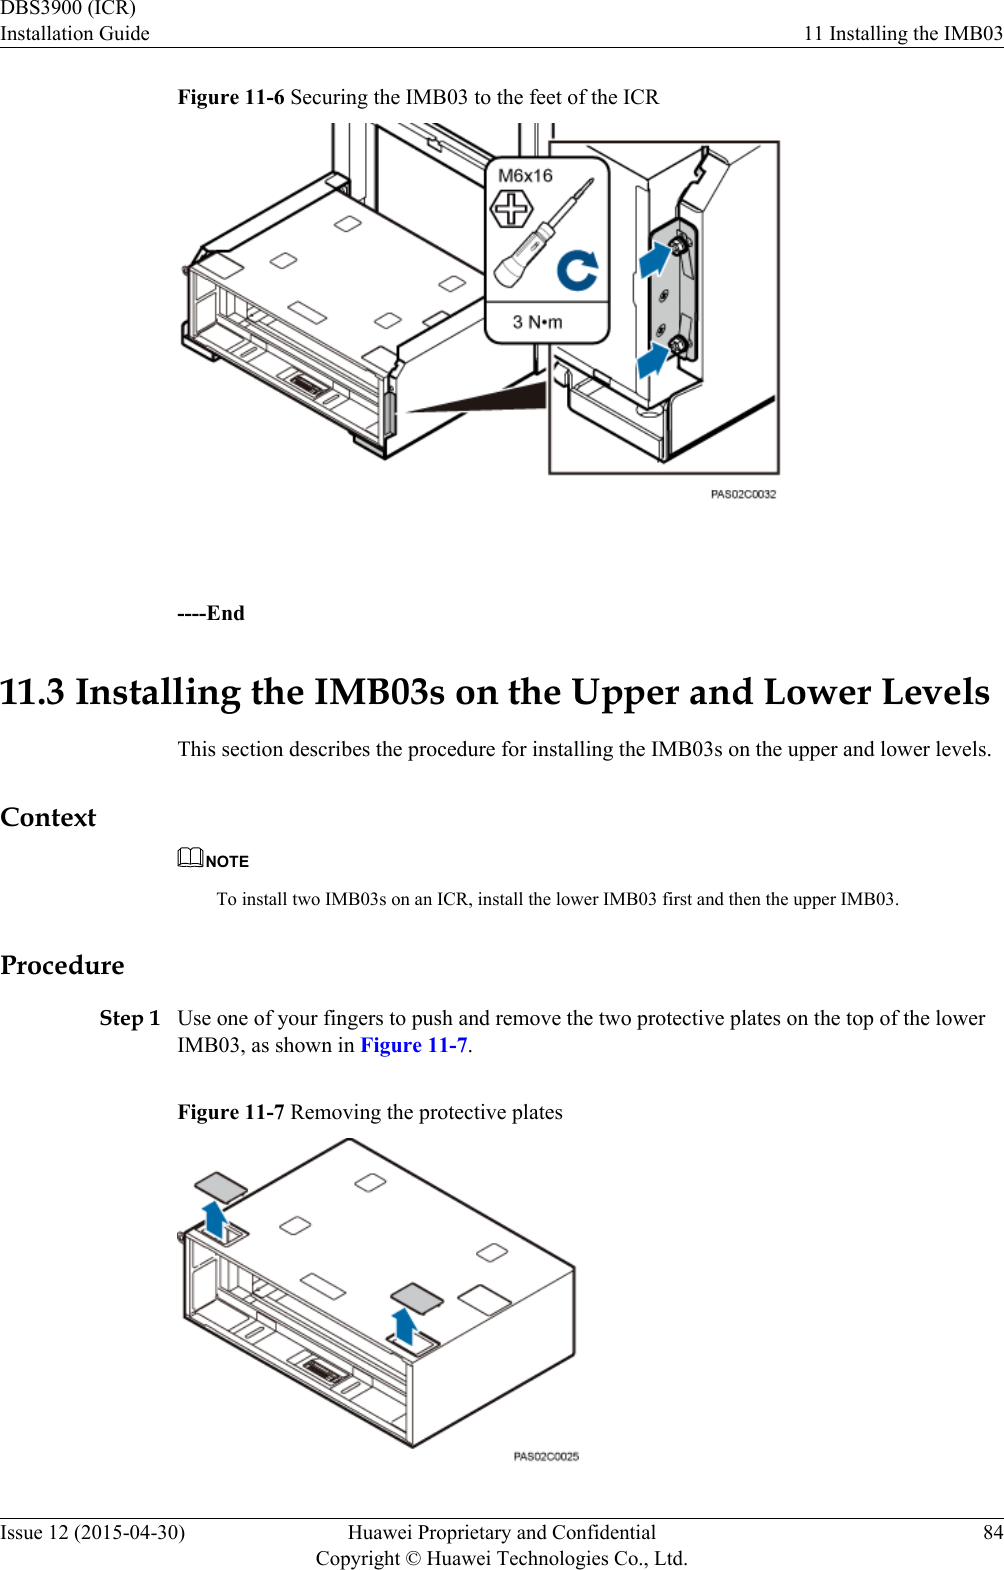 Figure 11-6 Securing the IMB03 to the feet of the ICR ----End11.3 Installing the IMB03s on the Upper and Lower LevelsThis section describes the procedure for installing the IMB03s on the upper and lower levels.ContextNOTETo install two IMB03s on an ICR, install the lower IMB03 first and then the upper IMB03.ProcedureStep 1 Use one of your fingers to push and remove the two protective plates on the top of the lowerIMB03, as shown in Figure 11-7.Figure 11-7 Removing the protective platesDBS3900 (ICR)Installation Guide 11 Installing the IMB03Issue 12 (2015-04-30) Huawei Proprietary and ConfidentialCopyright © Huawei Technologies Co., Ltd.84